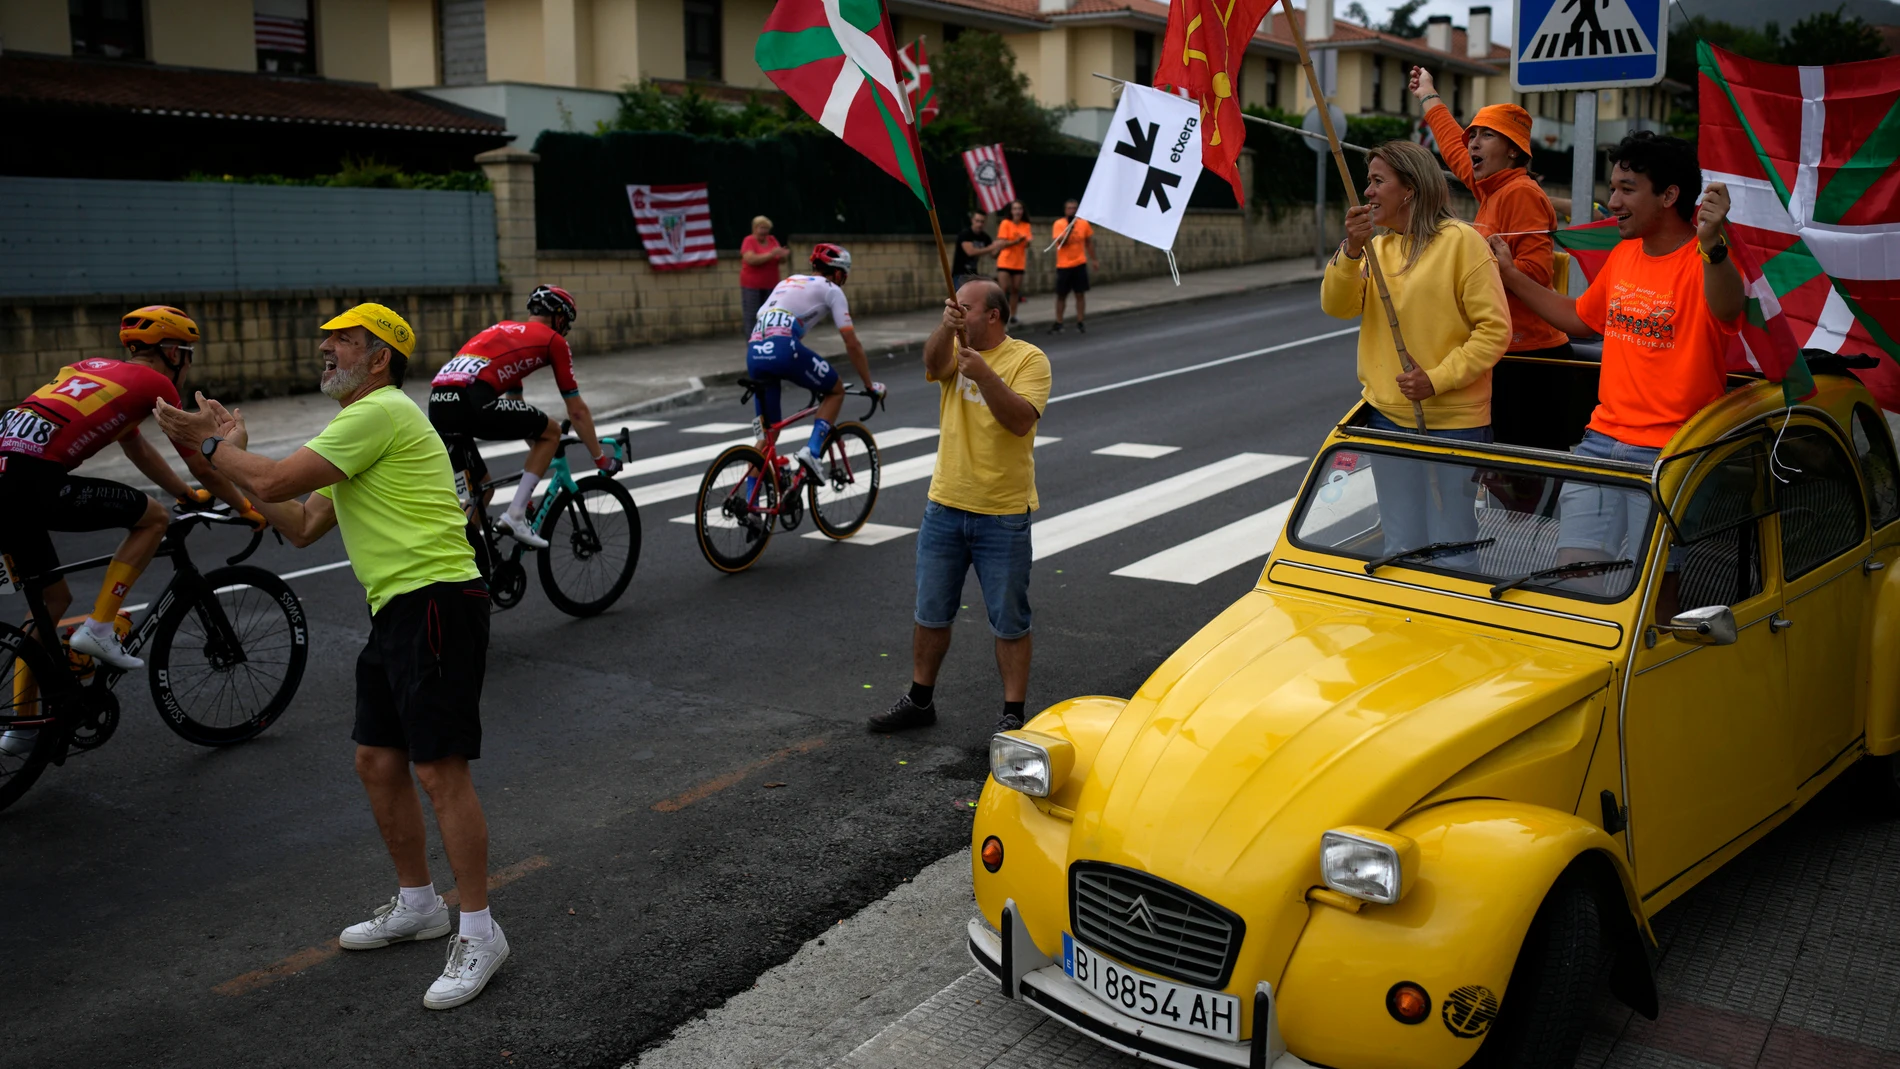 Fans on a classic Citroen 2CV wave flags during the first stage of the Tour de France cycling race over 182 kilometers (113 miles) with start and finish in Bilbao, Spain, Saturday, July 1, 2023. (AP Photo/Daniel Cole)